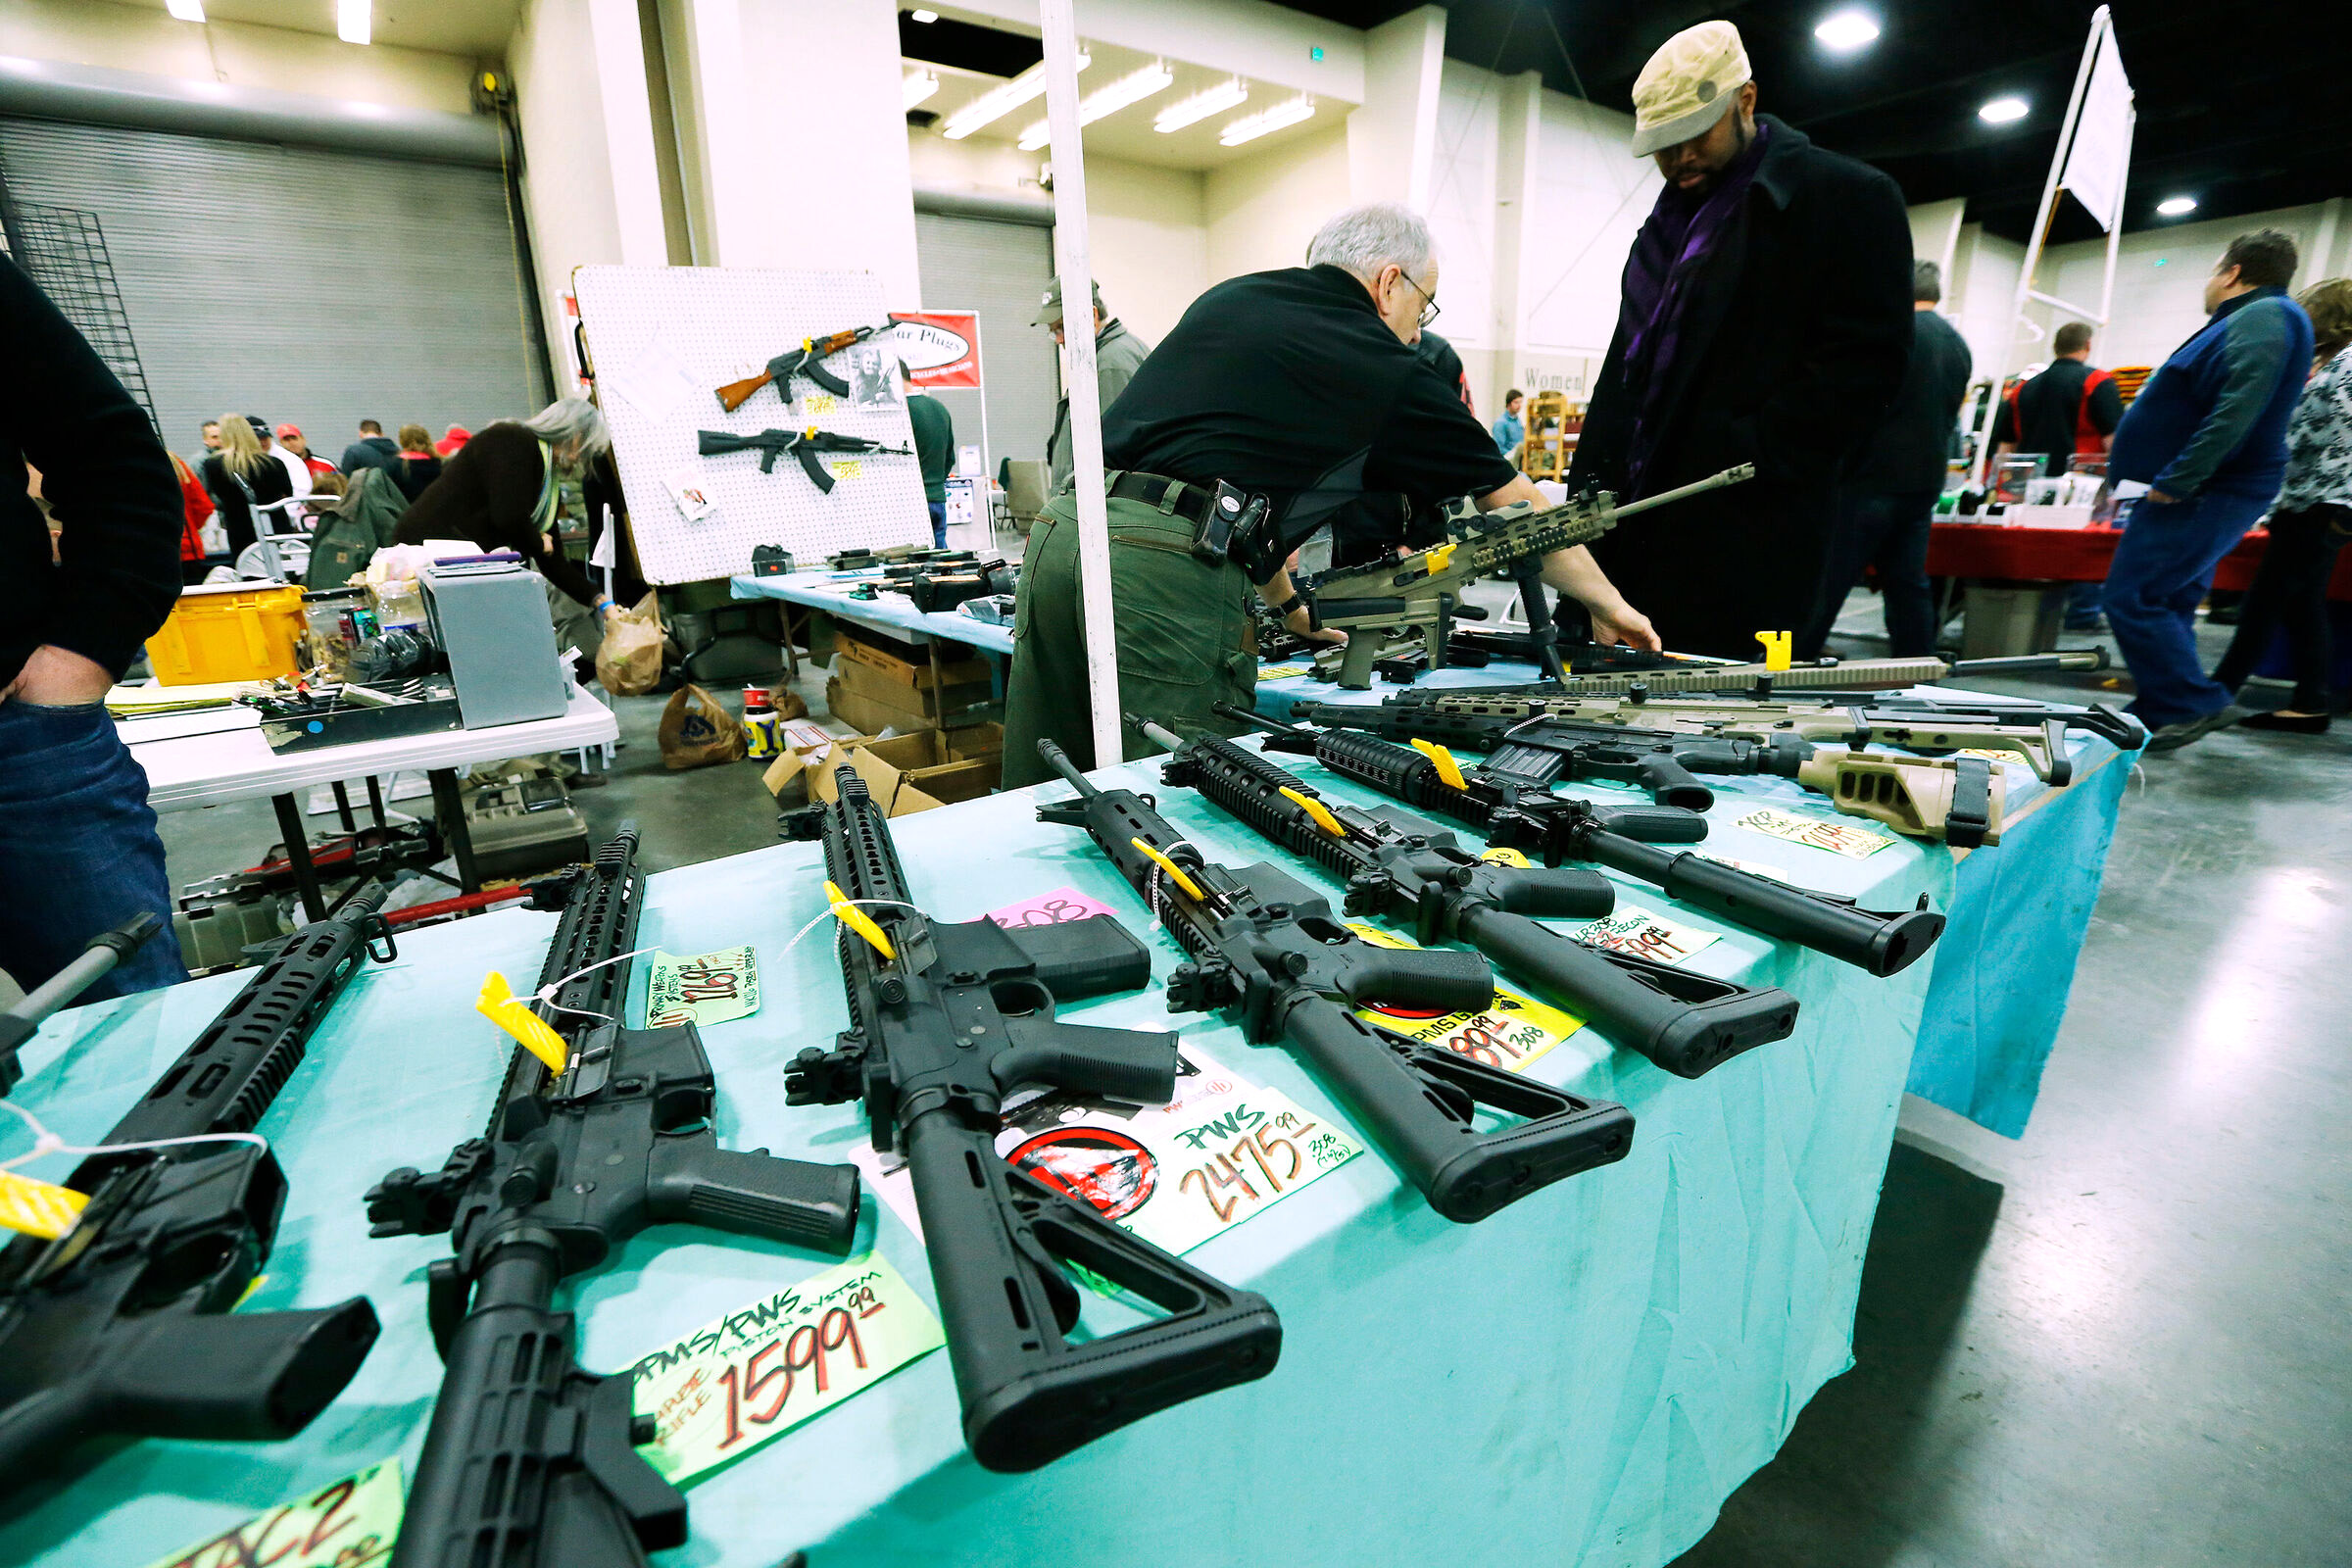 Guns for sale are pictured during the Rocky Mountain Gun Show at the South Towne Expo Center in Sandy on Jan. 3, 2015.